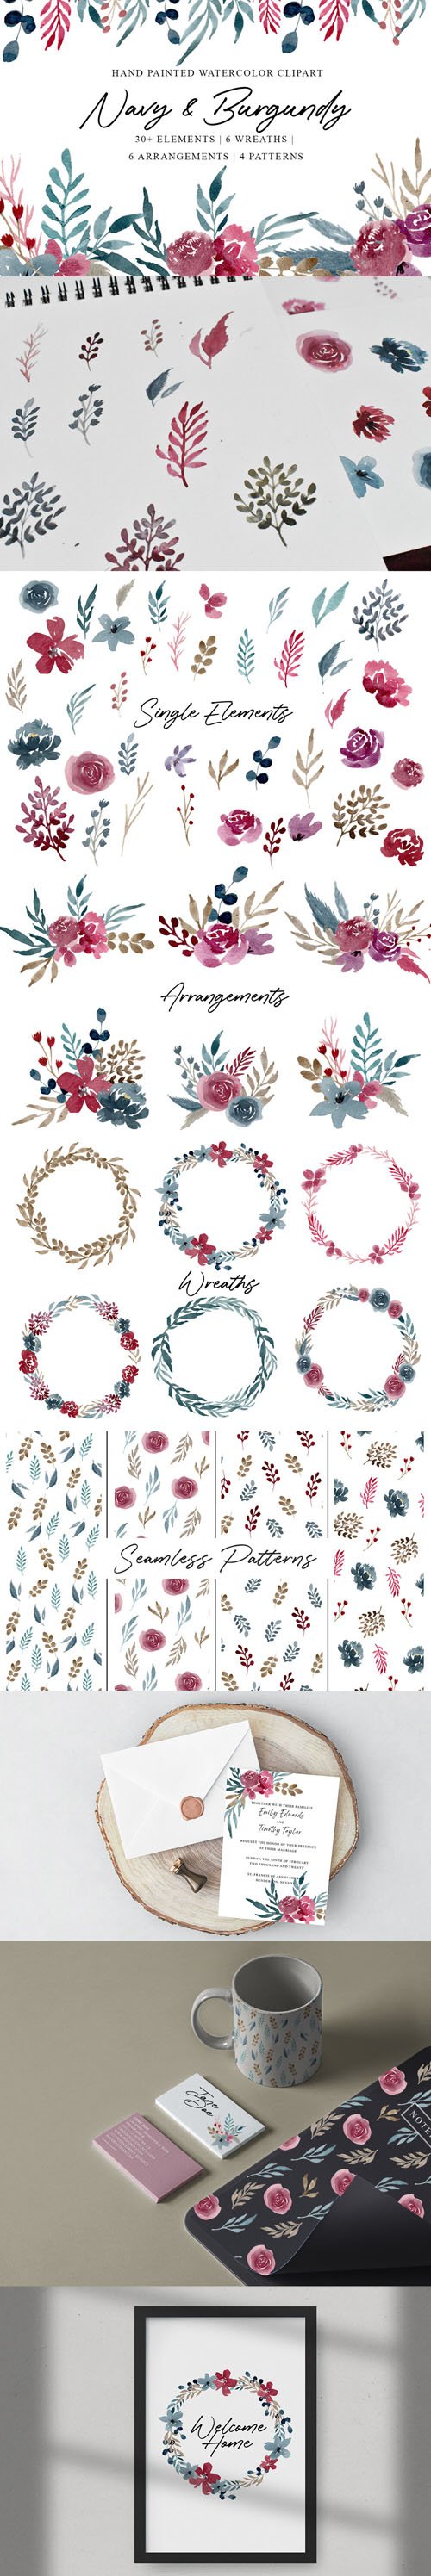 Navy & Burgundy - Hand Painted Watercolor Clipart PNG